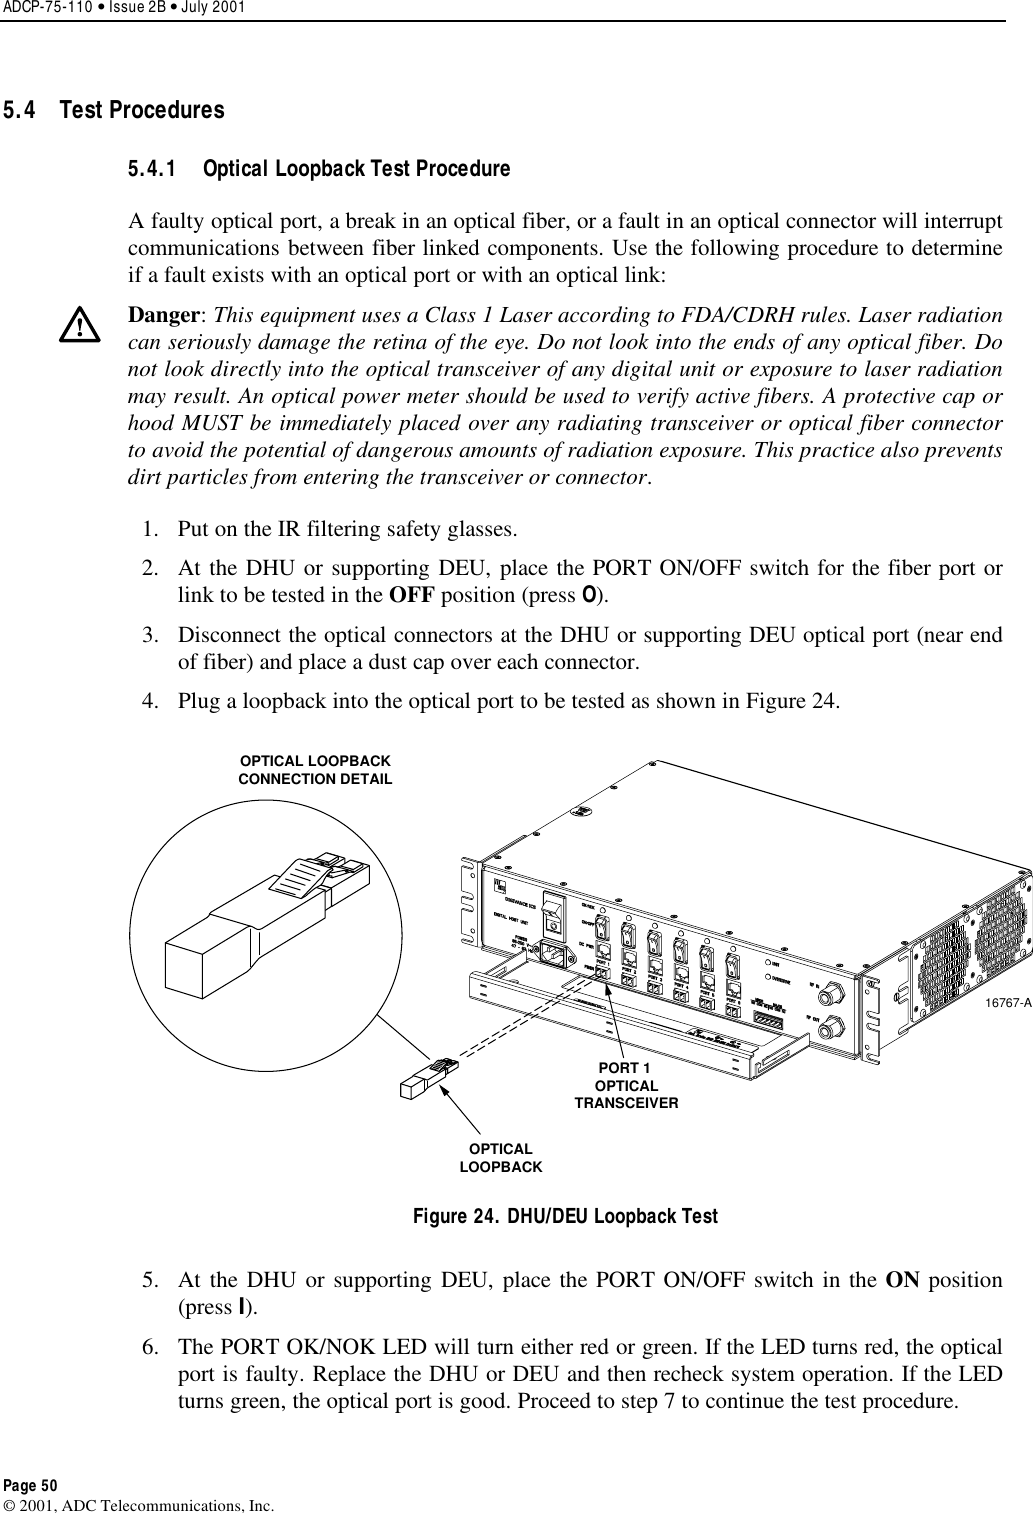 ADCP-75-110 • Issue 2B • July 2001 Page 50 ©2001, ADC Telecommunications, Inc.5.4 Test Procedures 5.4.1  Optical Loopback Test Procedure Afaulty optical port, abreak in an optical fiber, or a fault in an optical connector will interruptcommunications between fiber linked components. Use the following procedure to determineif afault exists with an optical port or with an optical link:Danger:This equipment uses aClass 1Laser according to FDA/CDRH rules. Laser radiationcan seriously damage the retina of the eye. Do not look into the ends of any optical fiber. Donot look directly into the optical transceiver of any digital unit or exposure to laser radiationmay result. An optical power meter should be used to verify active fibers. Aprotective cap orhood MUST be immediately placed over any radiating transceiver or optical fiber connectorto avoid the potential of dangerous amounts of radiation exposure. This practice also preventsdirt particles from entering the transceiver or connector.1. Put on the IR filtering safety glasses.2. At the DHU or supporting DEU, place the PORT ON/OFF switch for the fiber port orlink to be tested in the OFF position (press O).3. Disconnect the optical connectors at the DHU or supporting DEU optical port (near endof fiber) and place adust cap over each connector.4. Plug aloopback into the optical port to be tested as shown in Figure 24.16767-AOPTICAL LOOPBACKCONNECTION DETAILPORT 1 OPTICALTRANSCEIVEROPTICALLOOPBACKFigure 24. DHU/DEU Loopback Test 5. At the DHU or supporting DEU, place the PORT ON/OFF switch in the ON position(press I).6. The PORT OK/NOK LED will turn either red or green. If the LED turns red, the opticalport is faulty. Replace the DHU or DEU and then recheck system operation. If the LEDturns green, the optical port is good. Proceed to step 7to continue the test procedure.